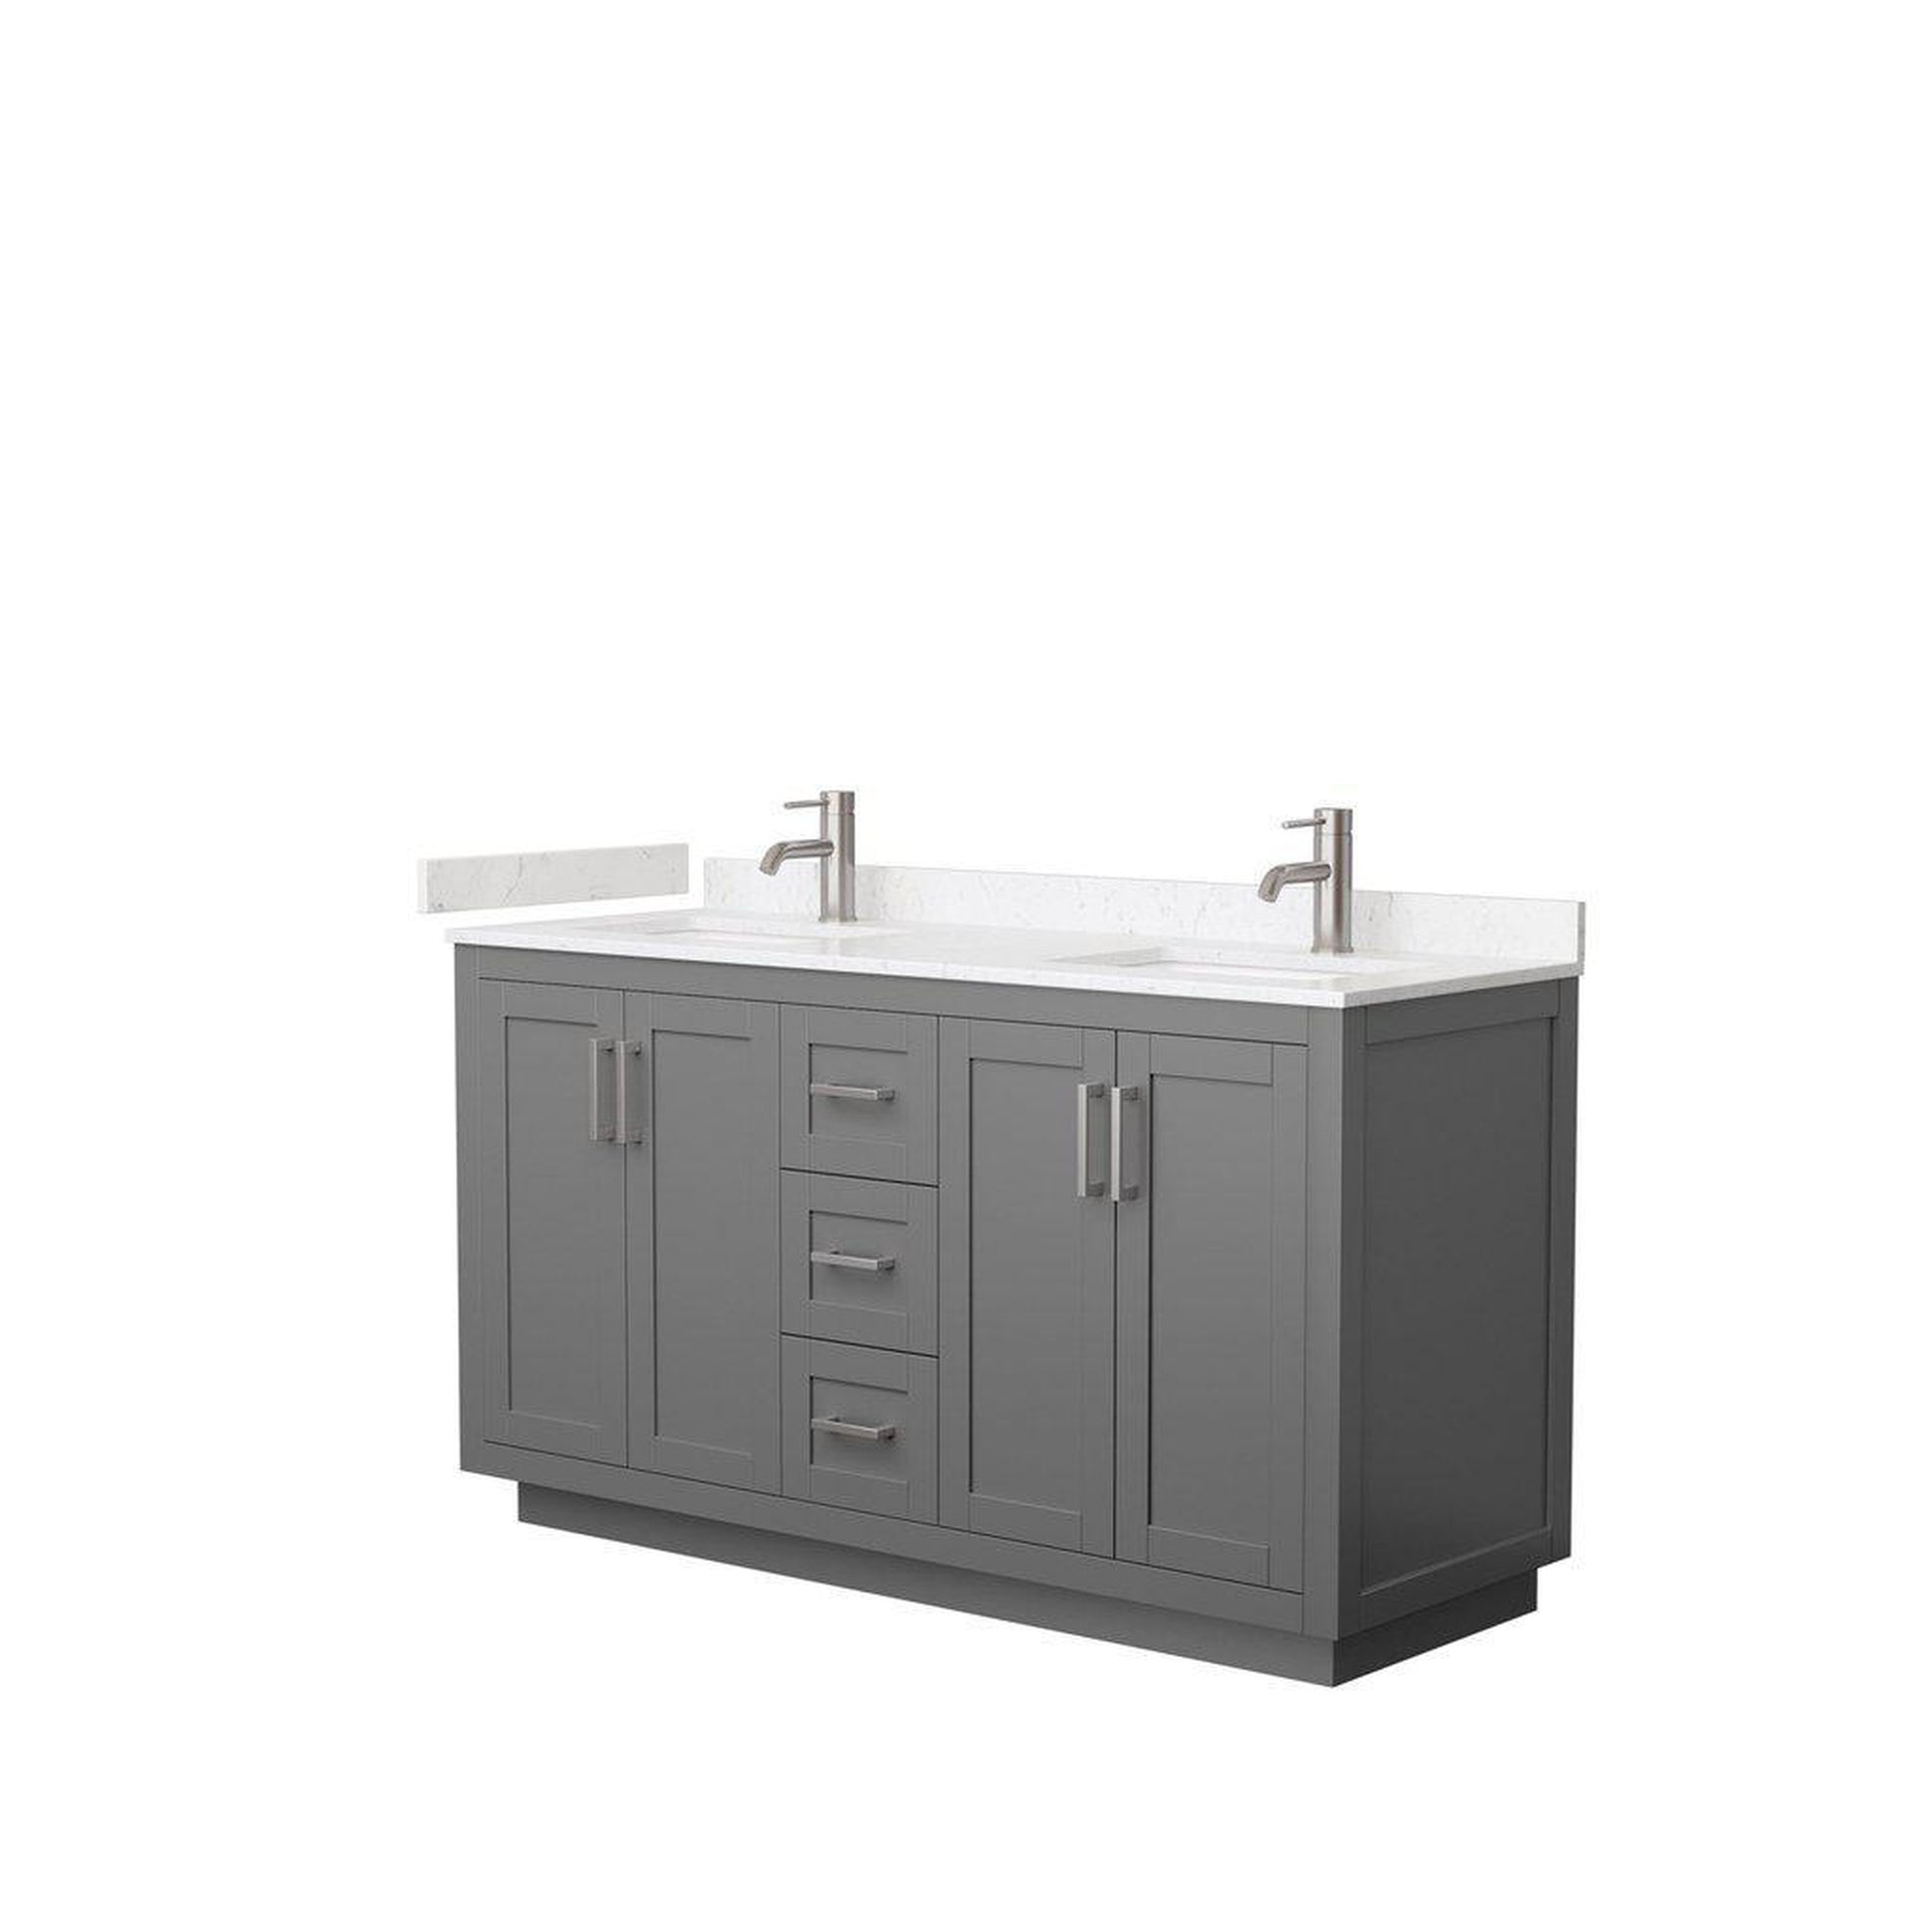 Wyndham Collection Miranda 60" Double Bathroom Dark Gray Vanity Set With Light-Vein Carrara Cultured Marble Countertop, Undermount Square Sink, And Brushed Nickel Trim